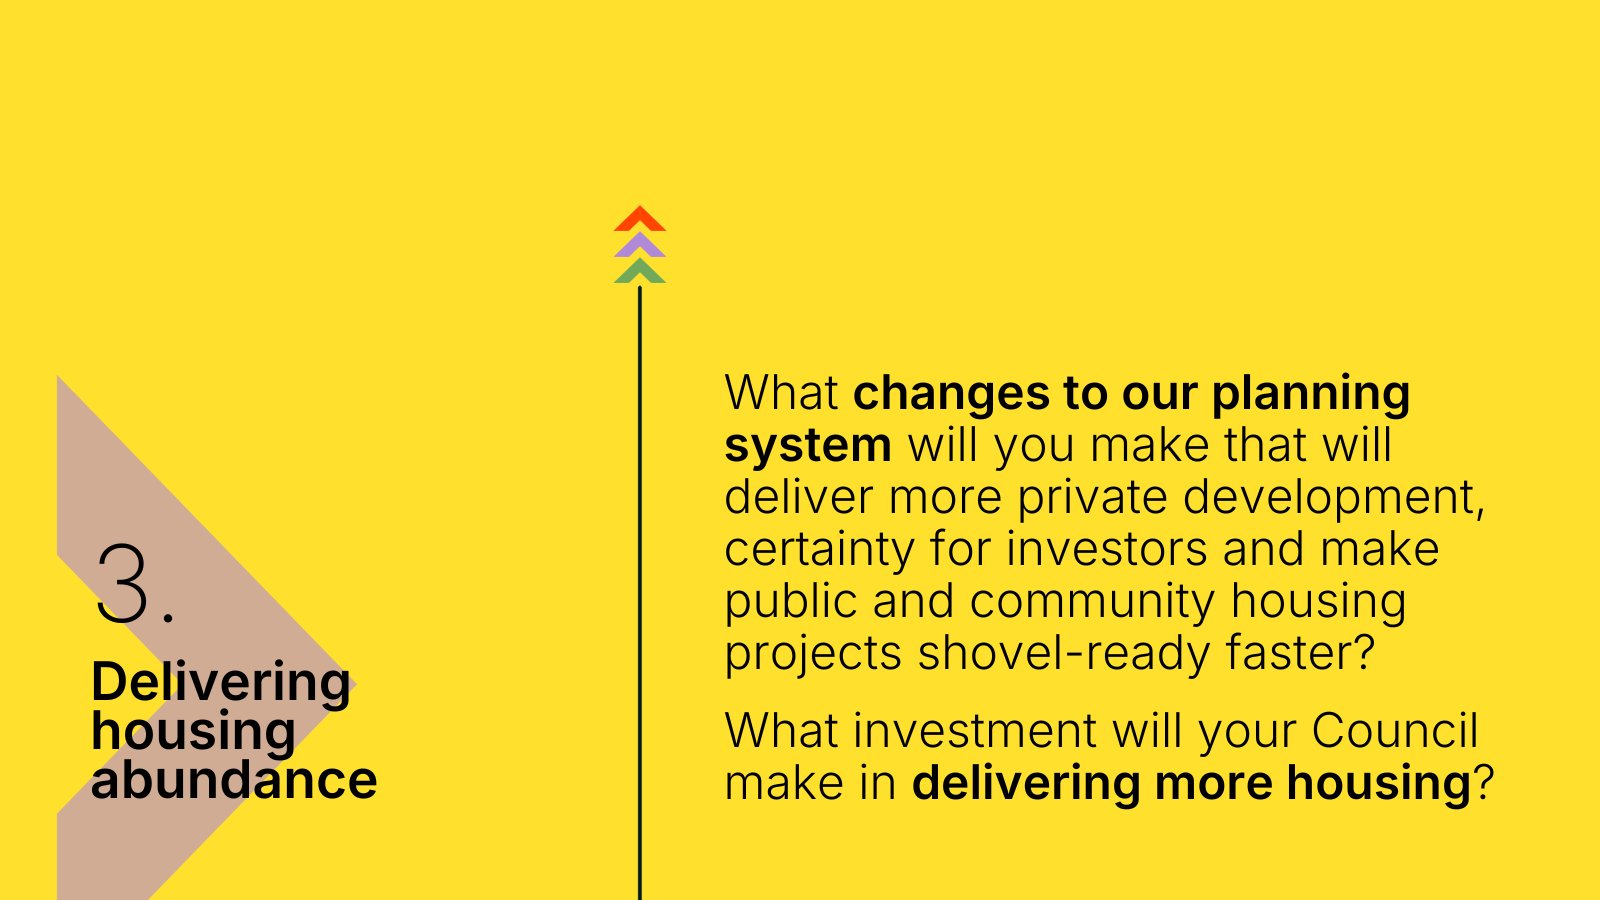 What changes to our planning system will you make that will deliver more private development, certainty for investors and make public and community housing
projects shovel-ready faster? What investment will your Council
make in delivering more housing?